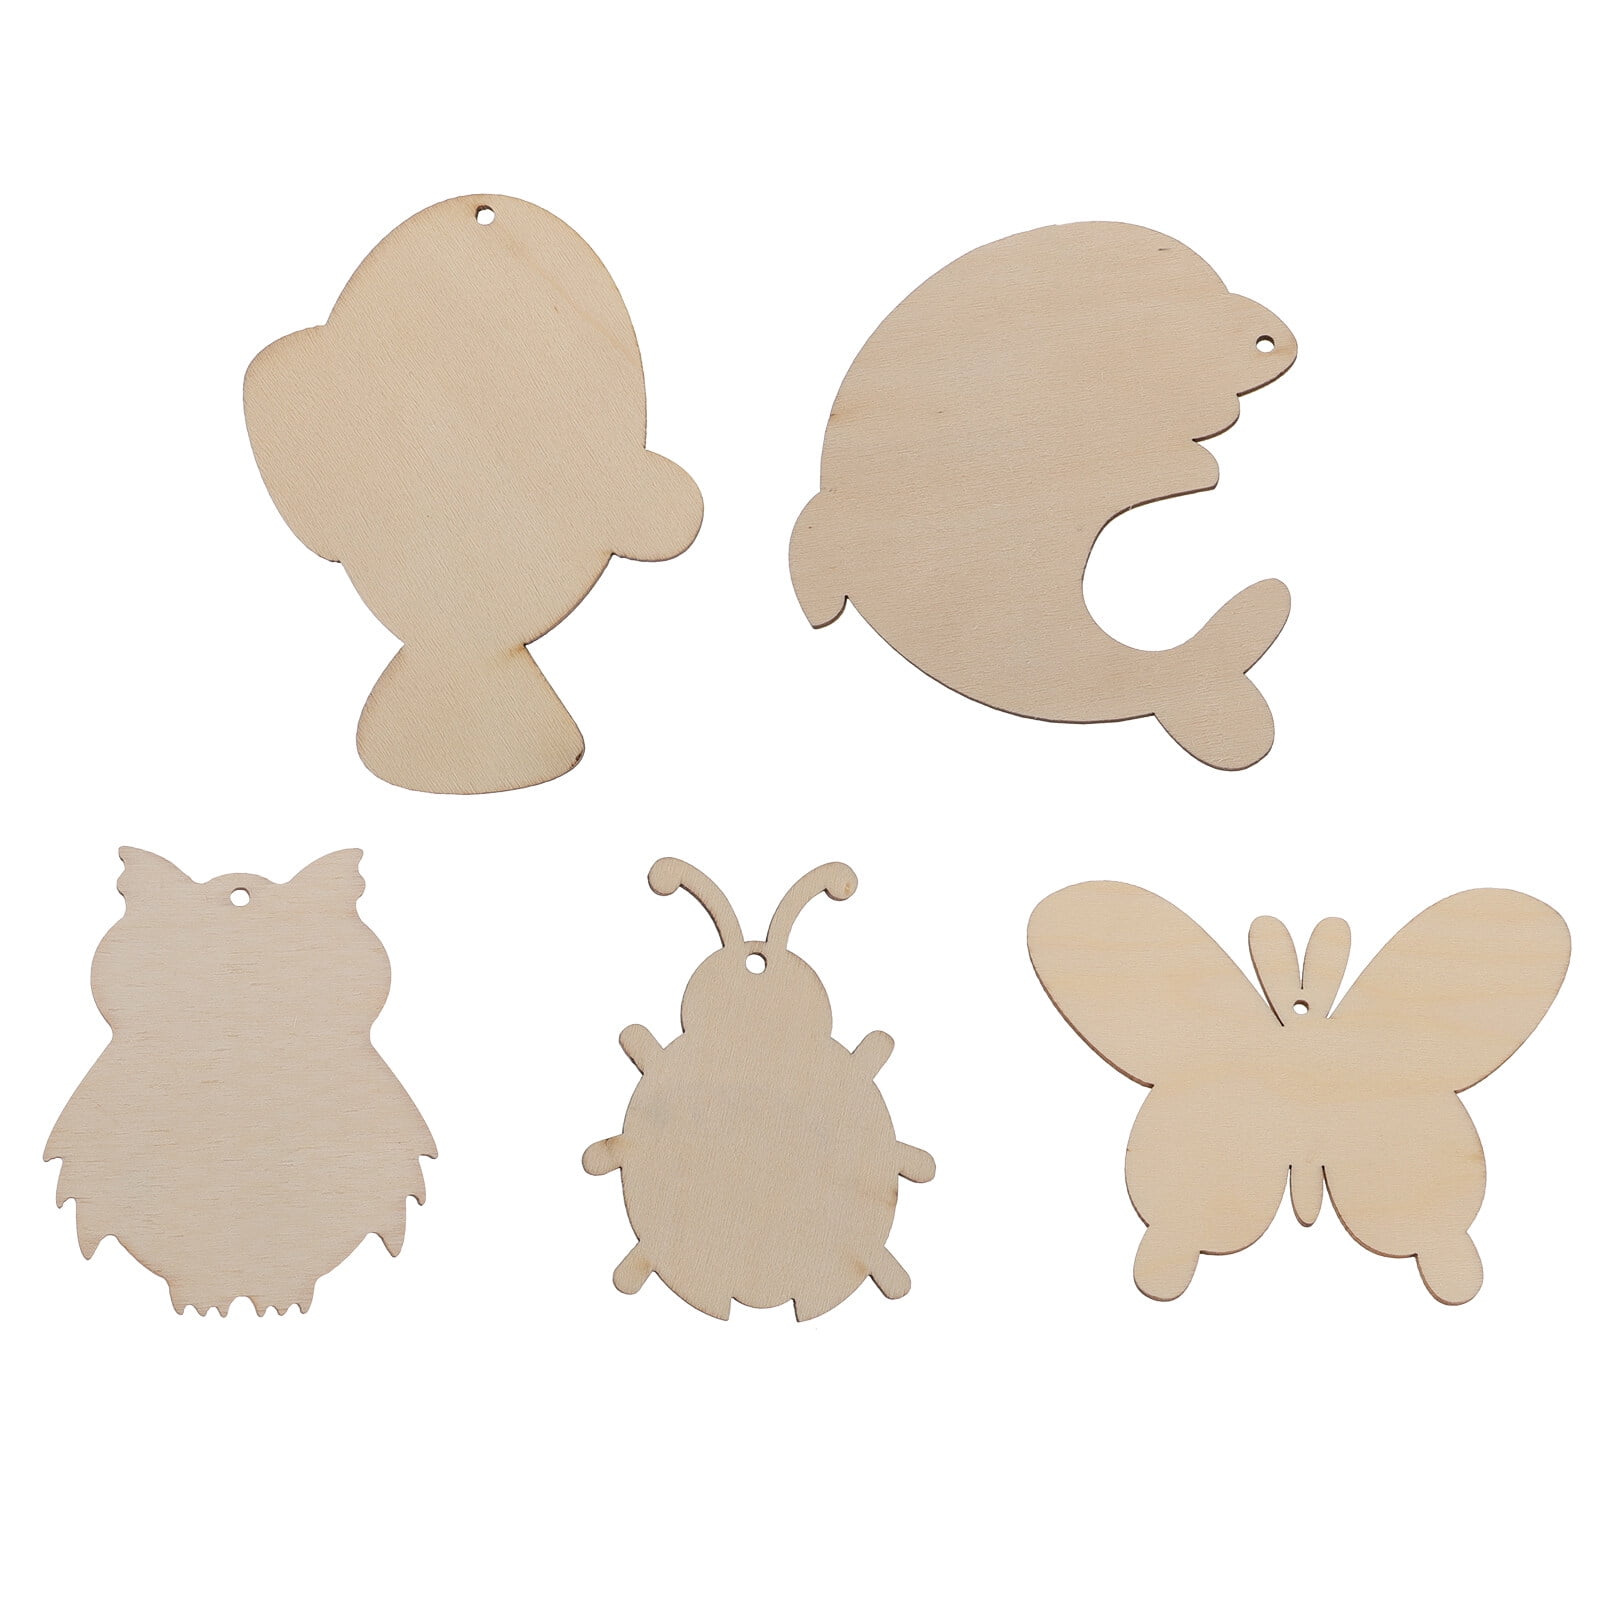 Good Wood by Leisure Arts: Under The Sea Crate Set - 7 Piece Animal Wood  Cutouts - Small Wooden Shapes for Crafts - Wooden Craft Shapes - wooden  animals to paint